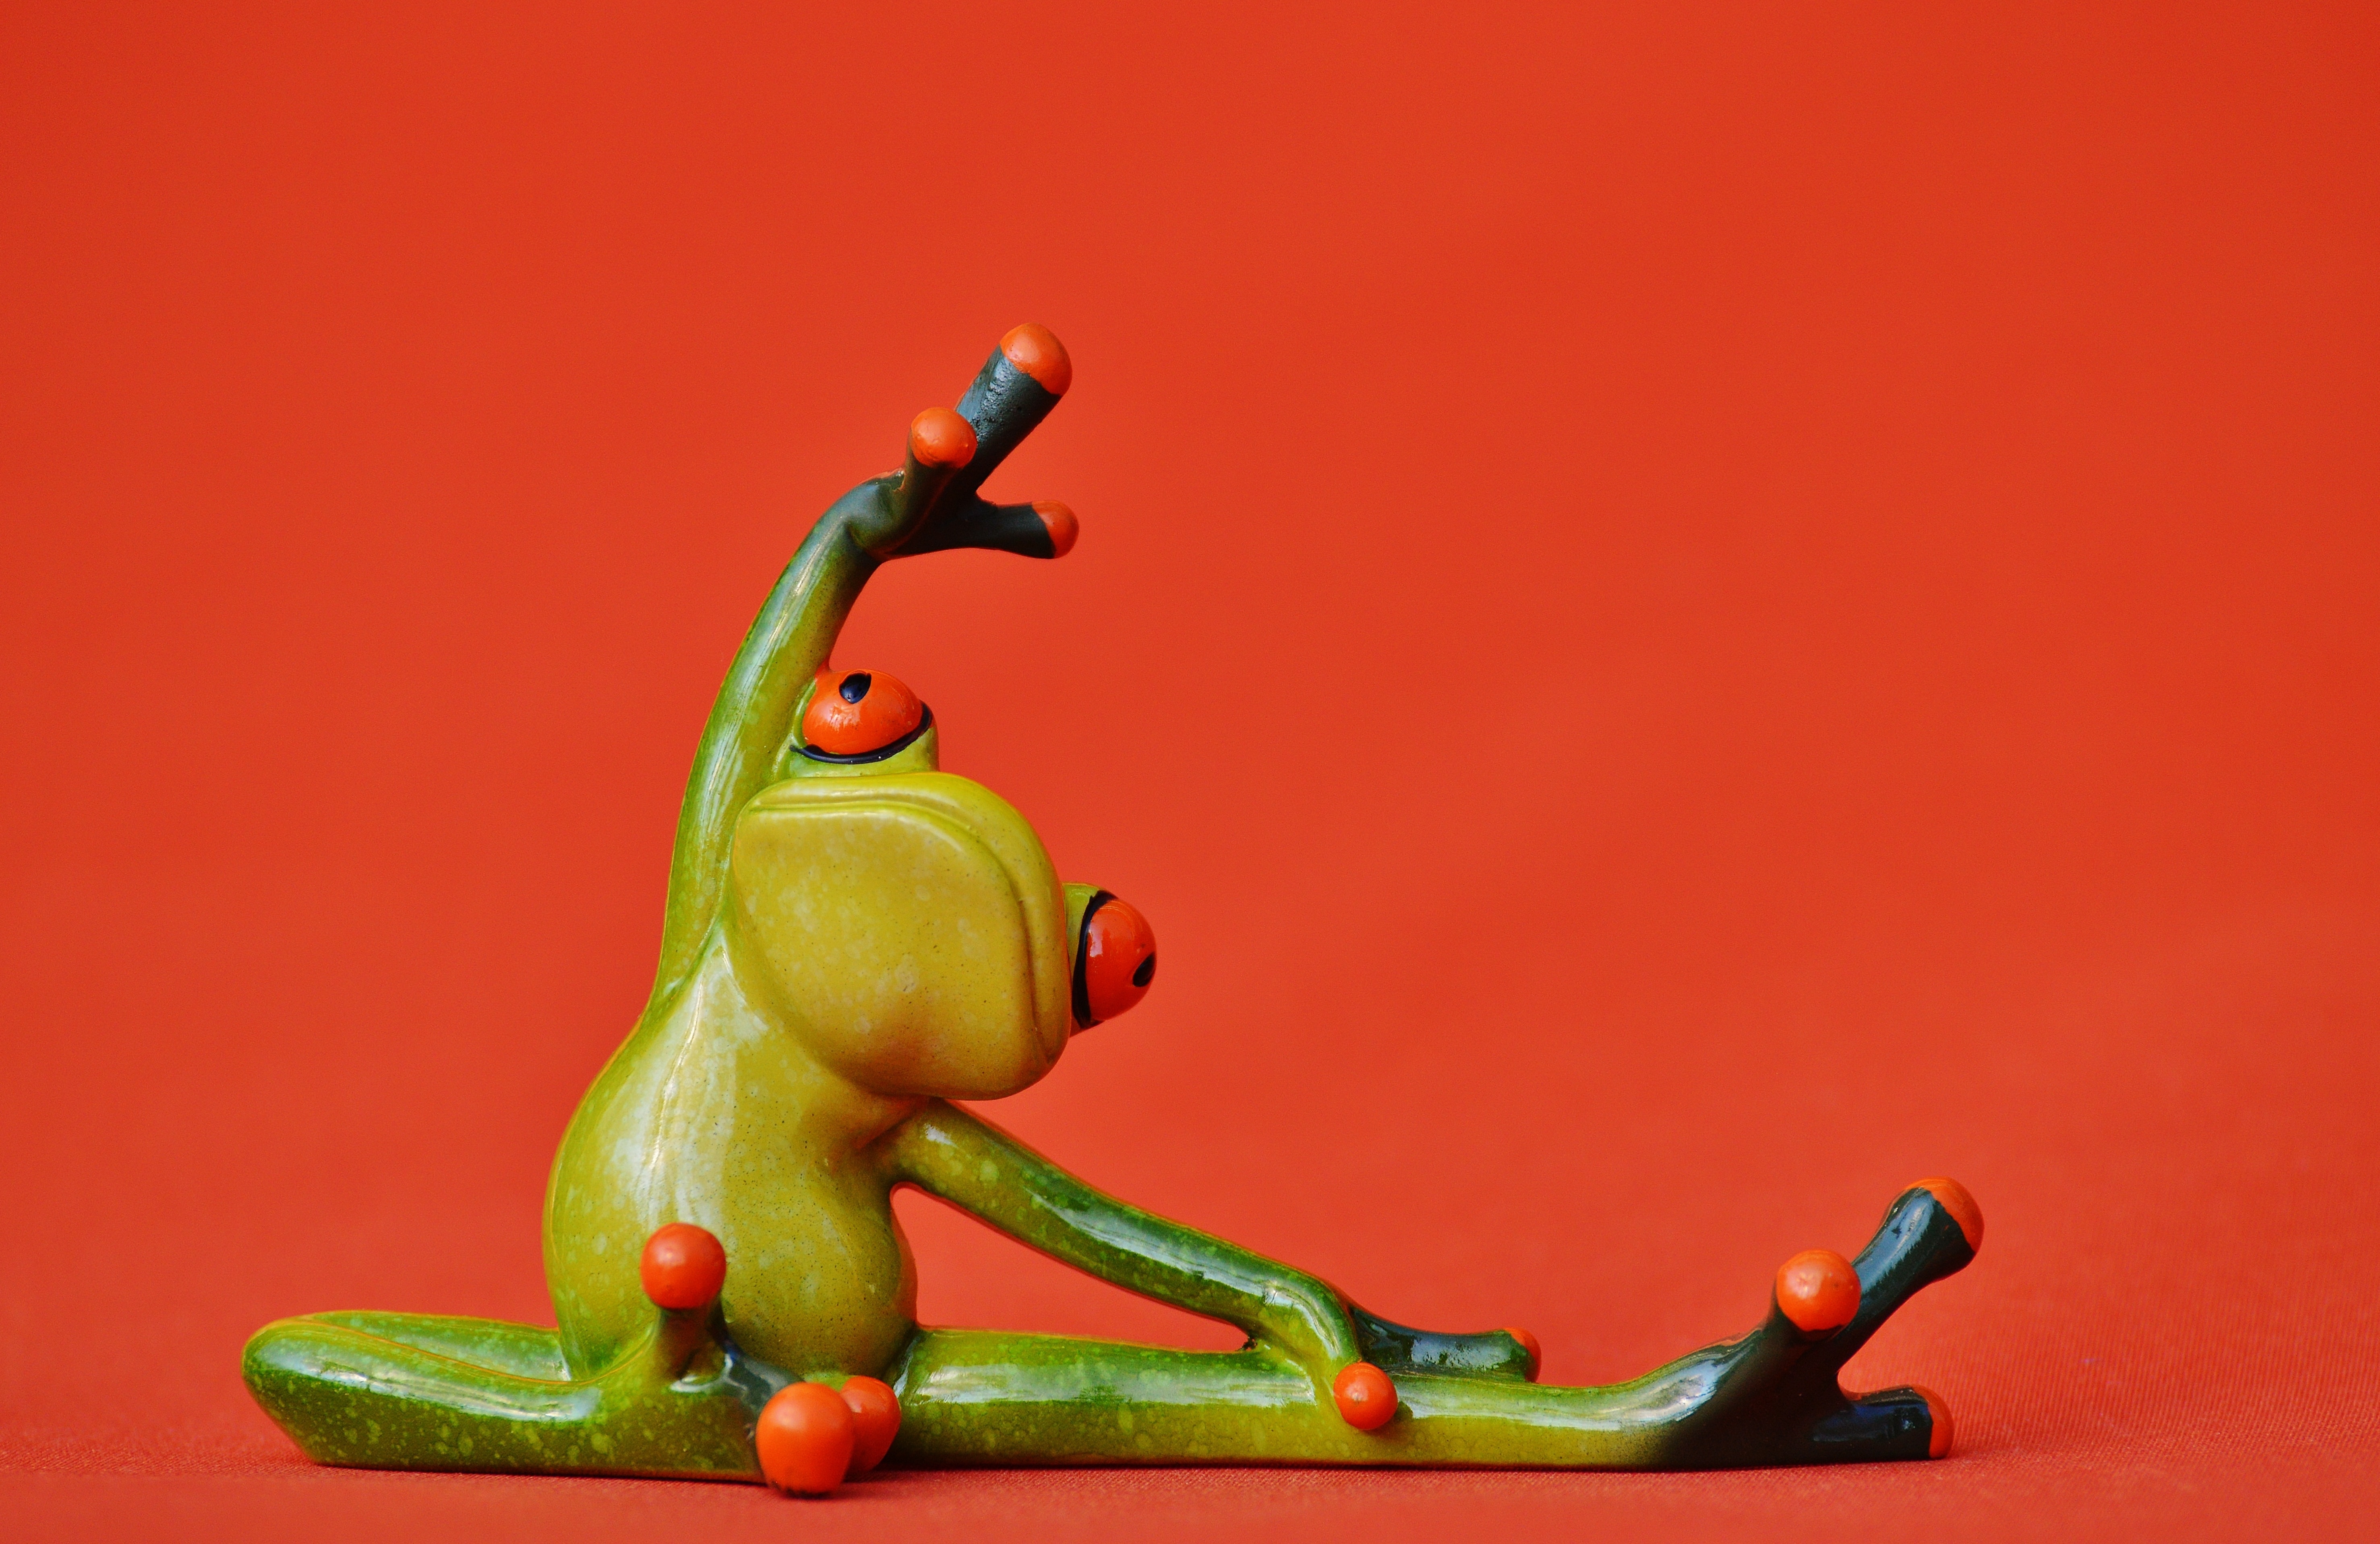 Funny, Fig, Frogs, Yoga, Gymnastics, colored background, vegetable